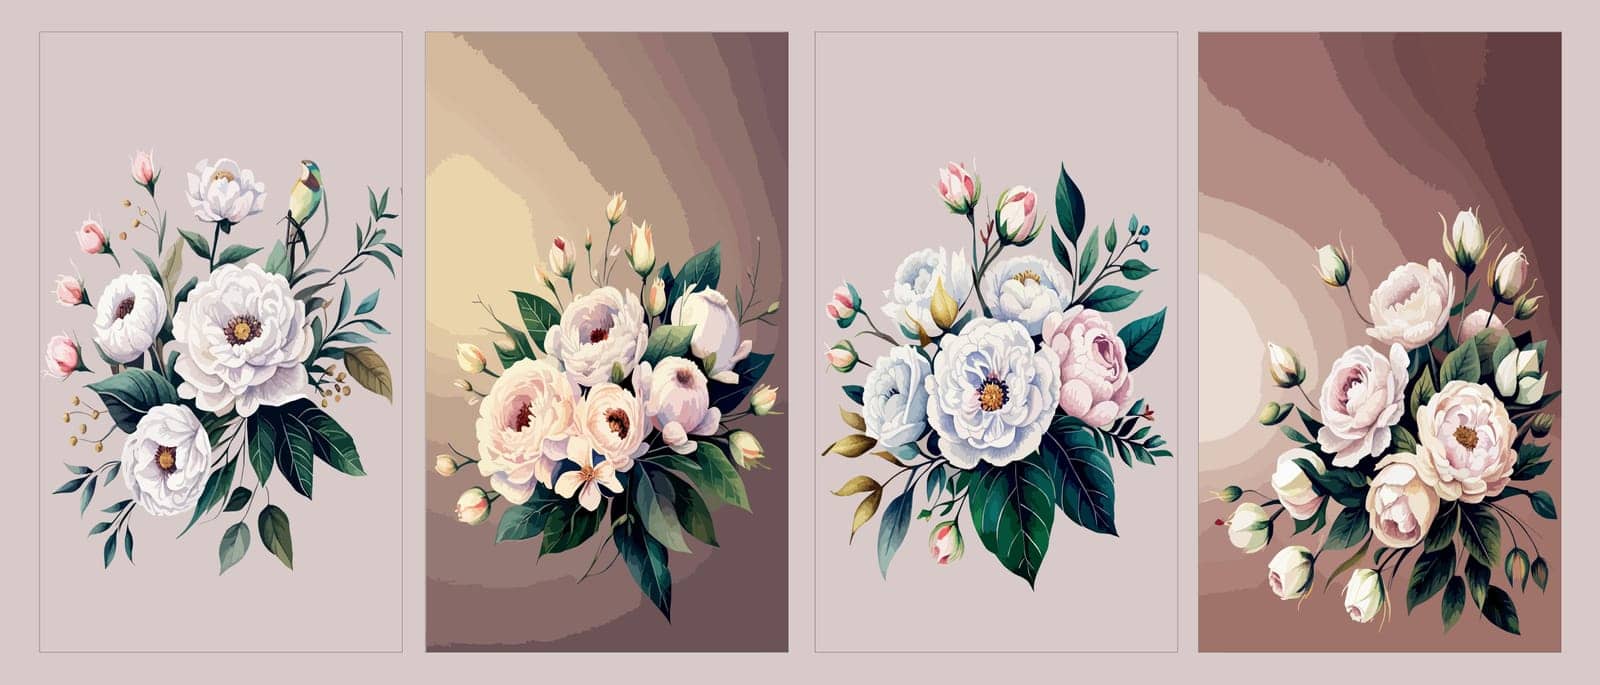 Banner set floral pattern with peonies on light background, watercolor. by EkaterinaPereslavtseva